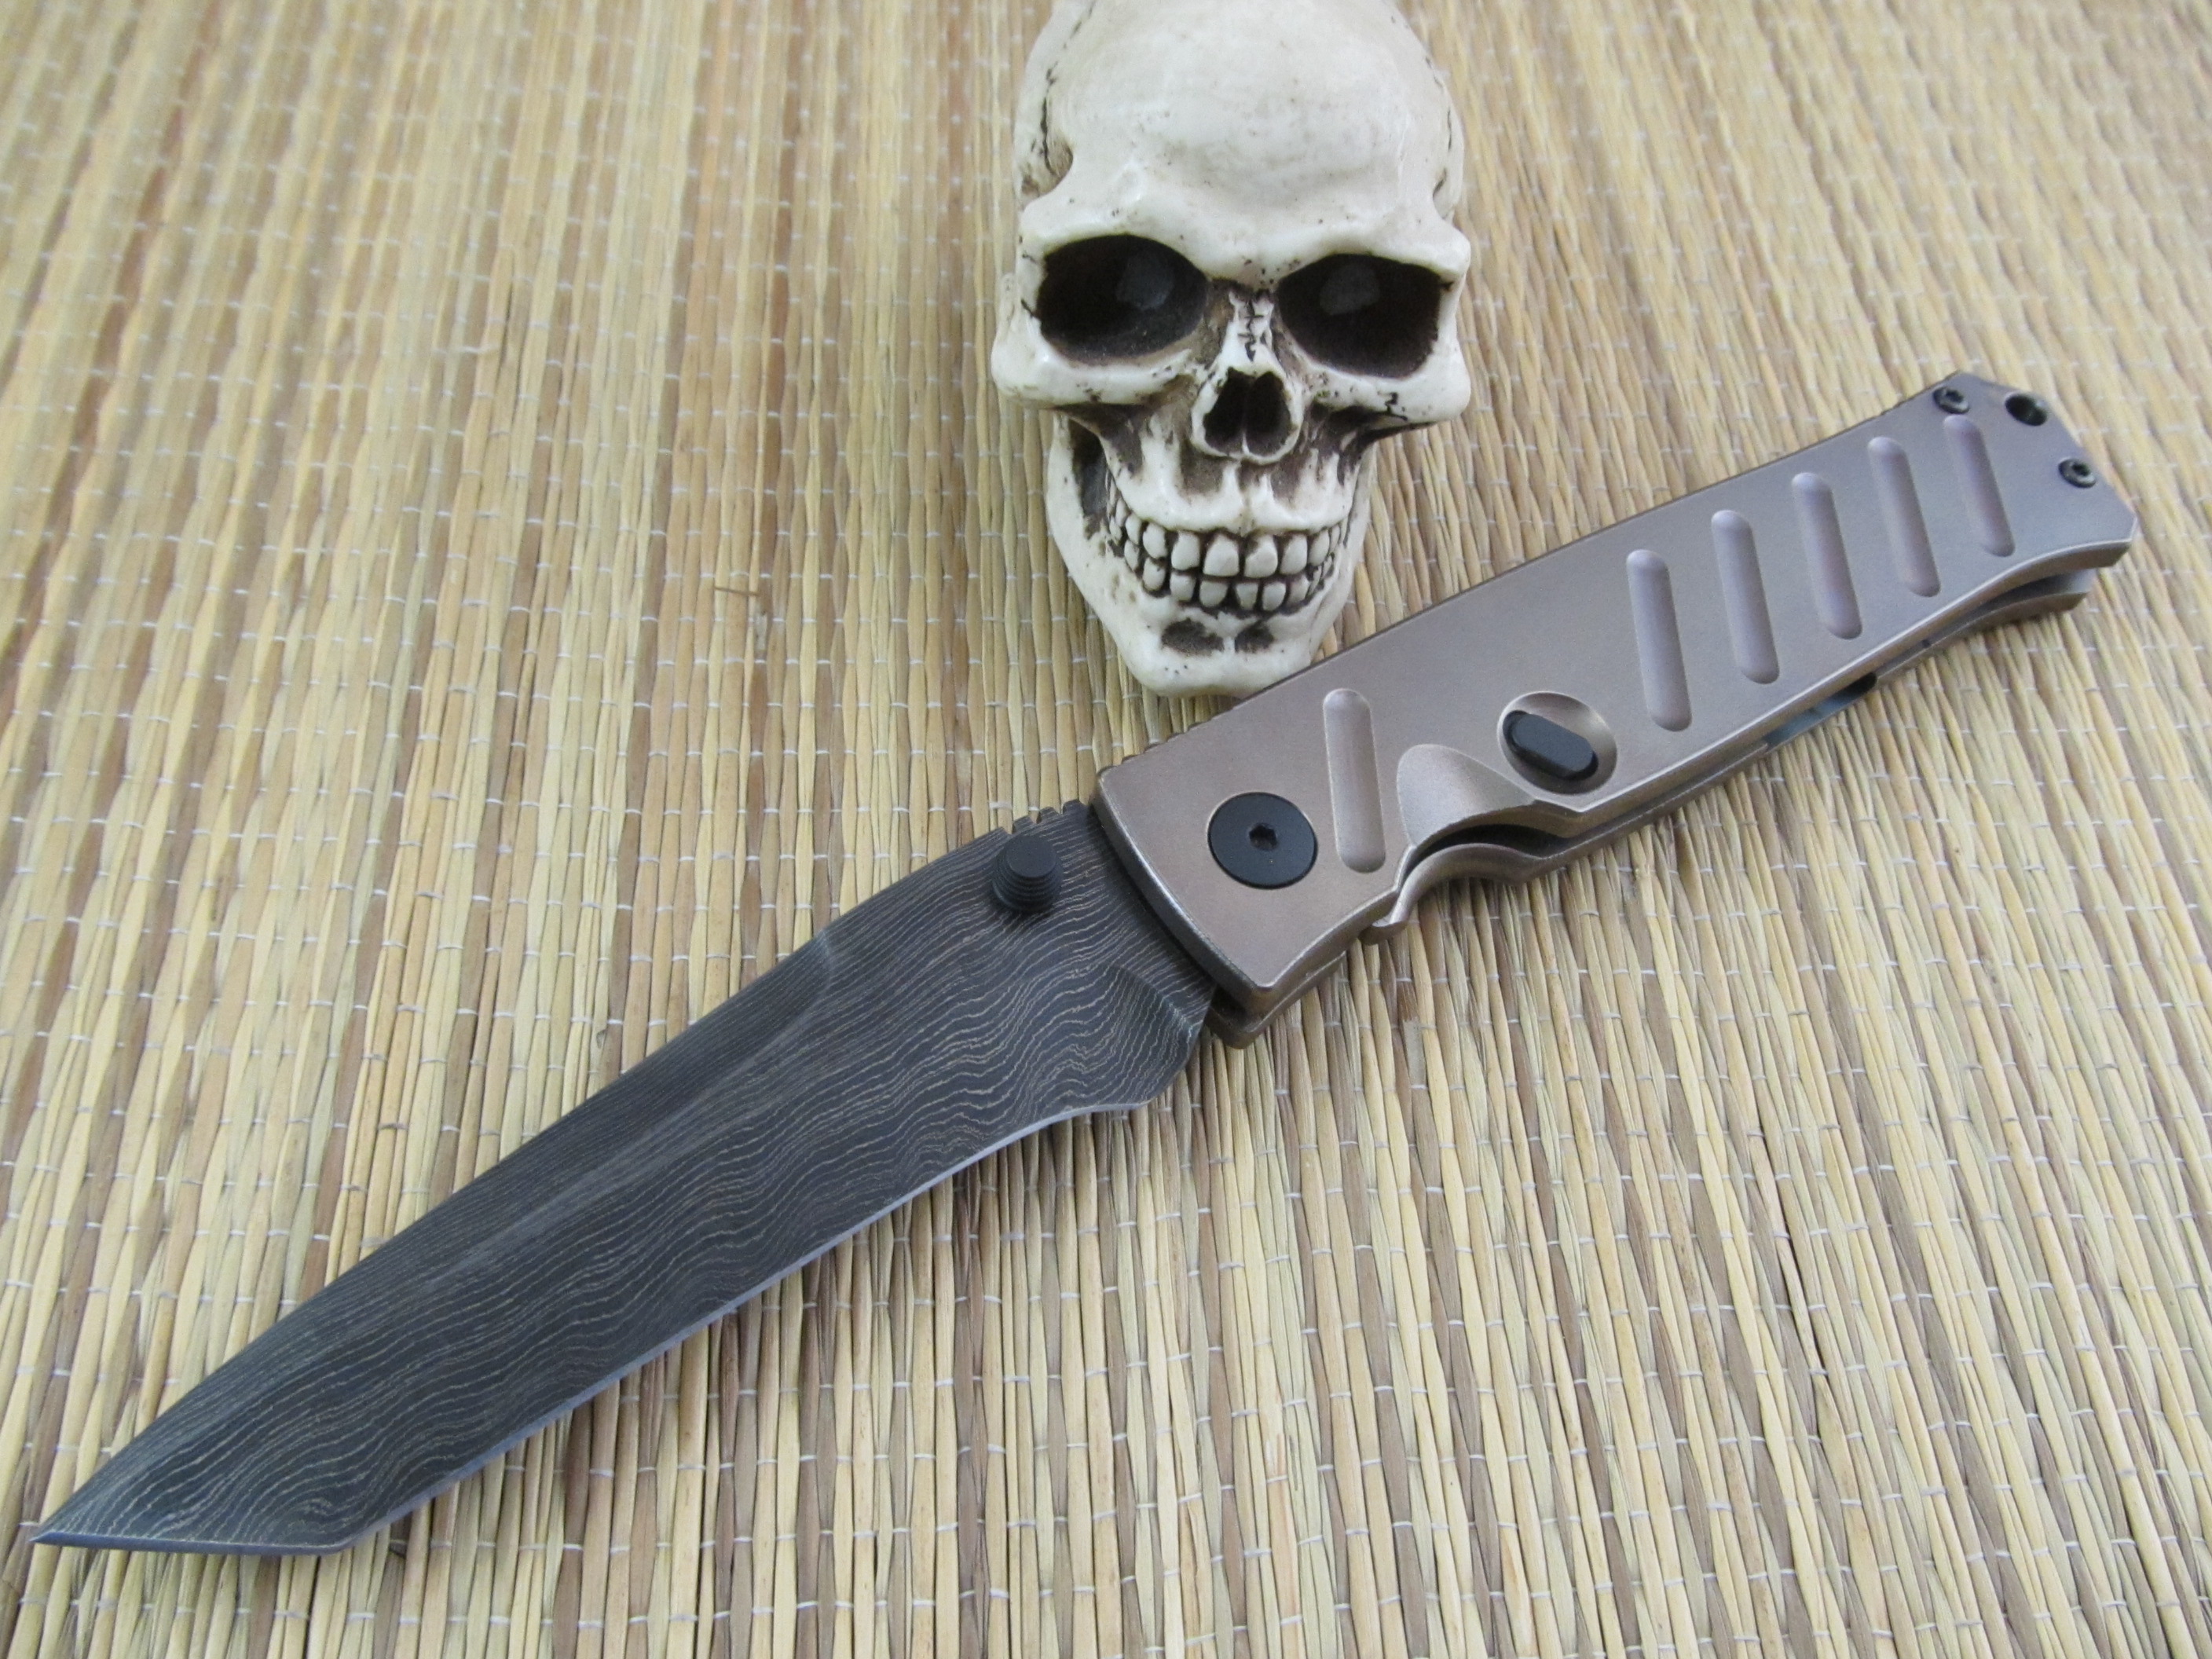 CK&T Cutters Knife and Tool Prototype *SOLD*